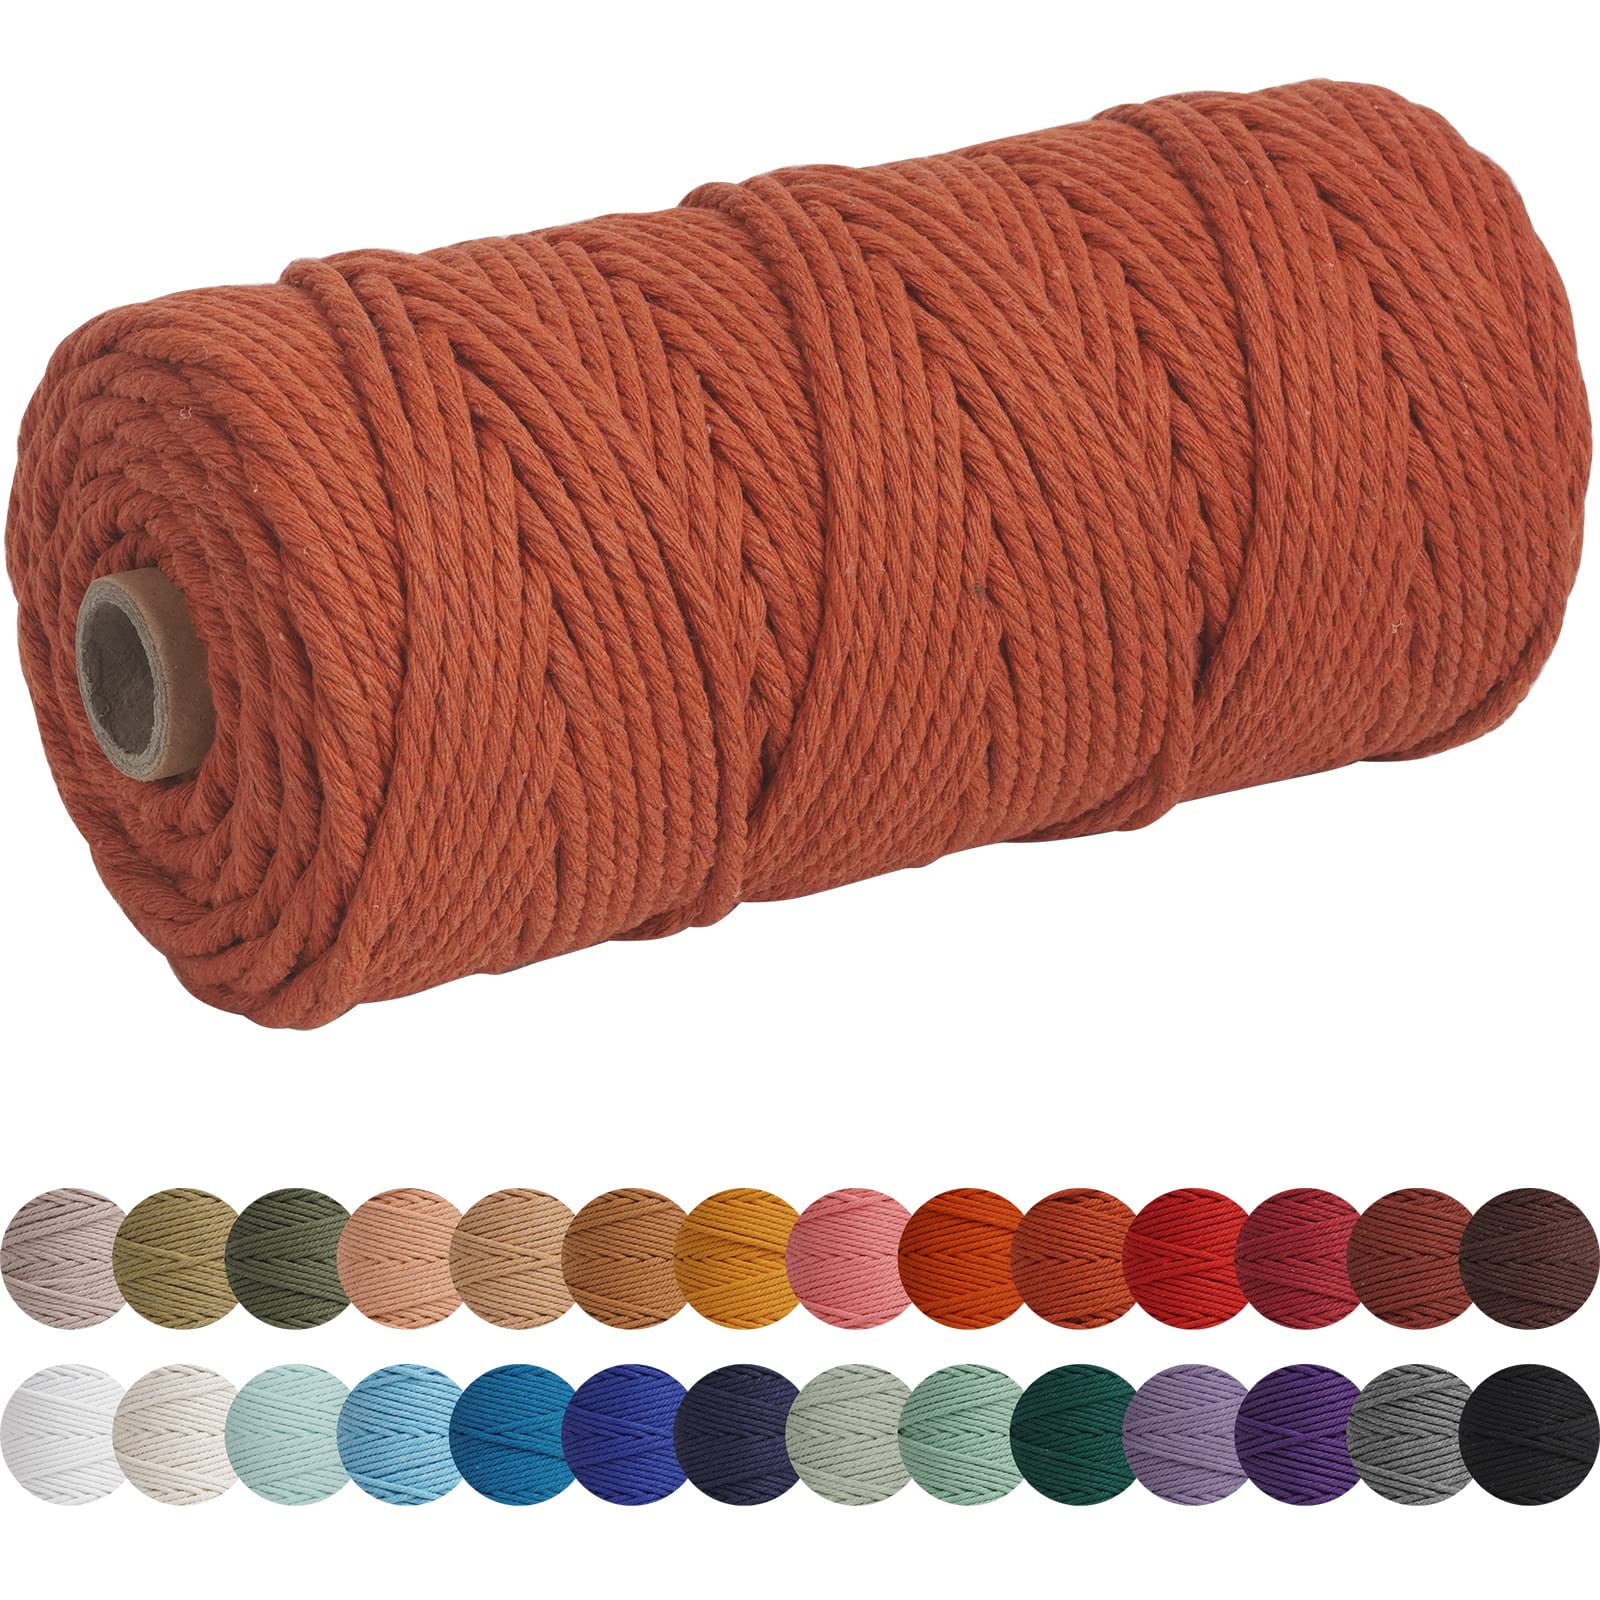 3mm Triple Strand Macrame Rope – Ribbons and Spools